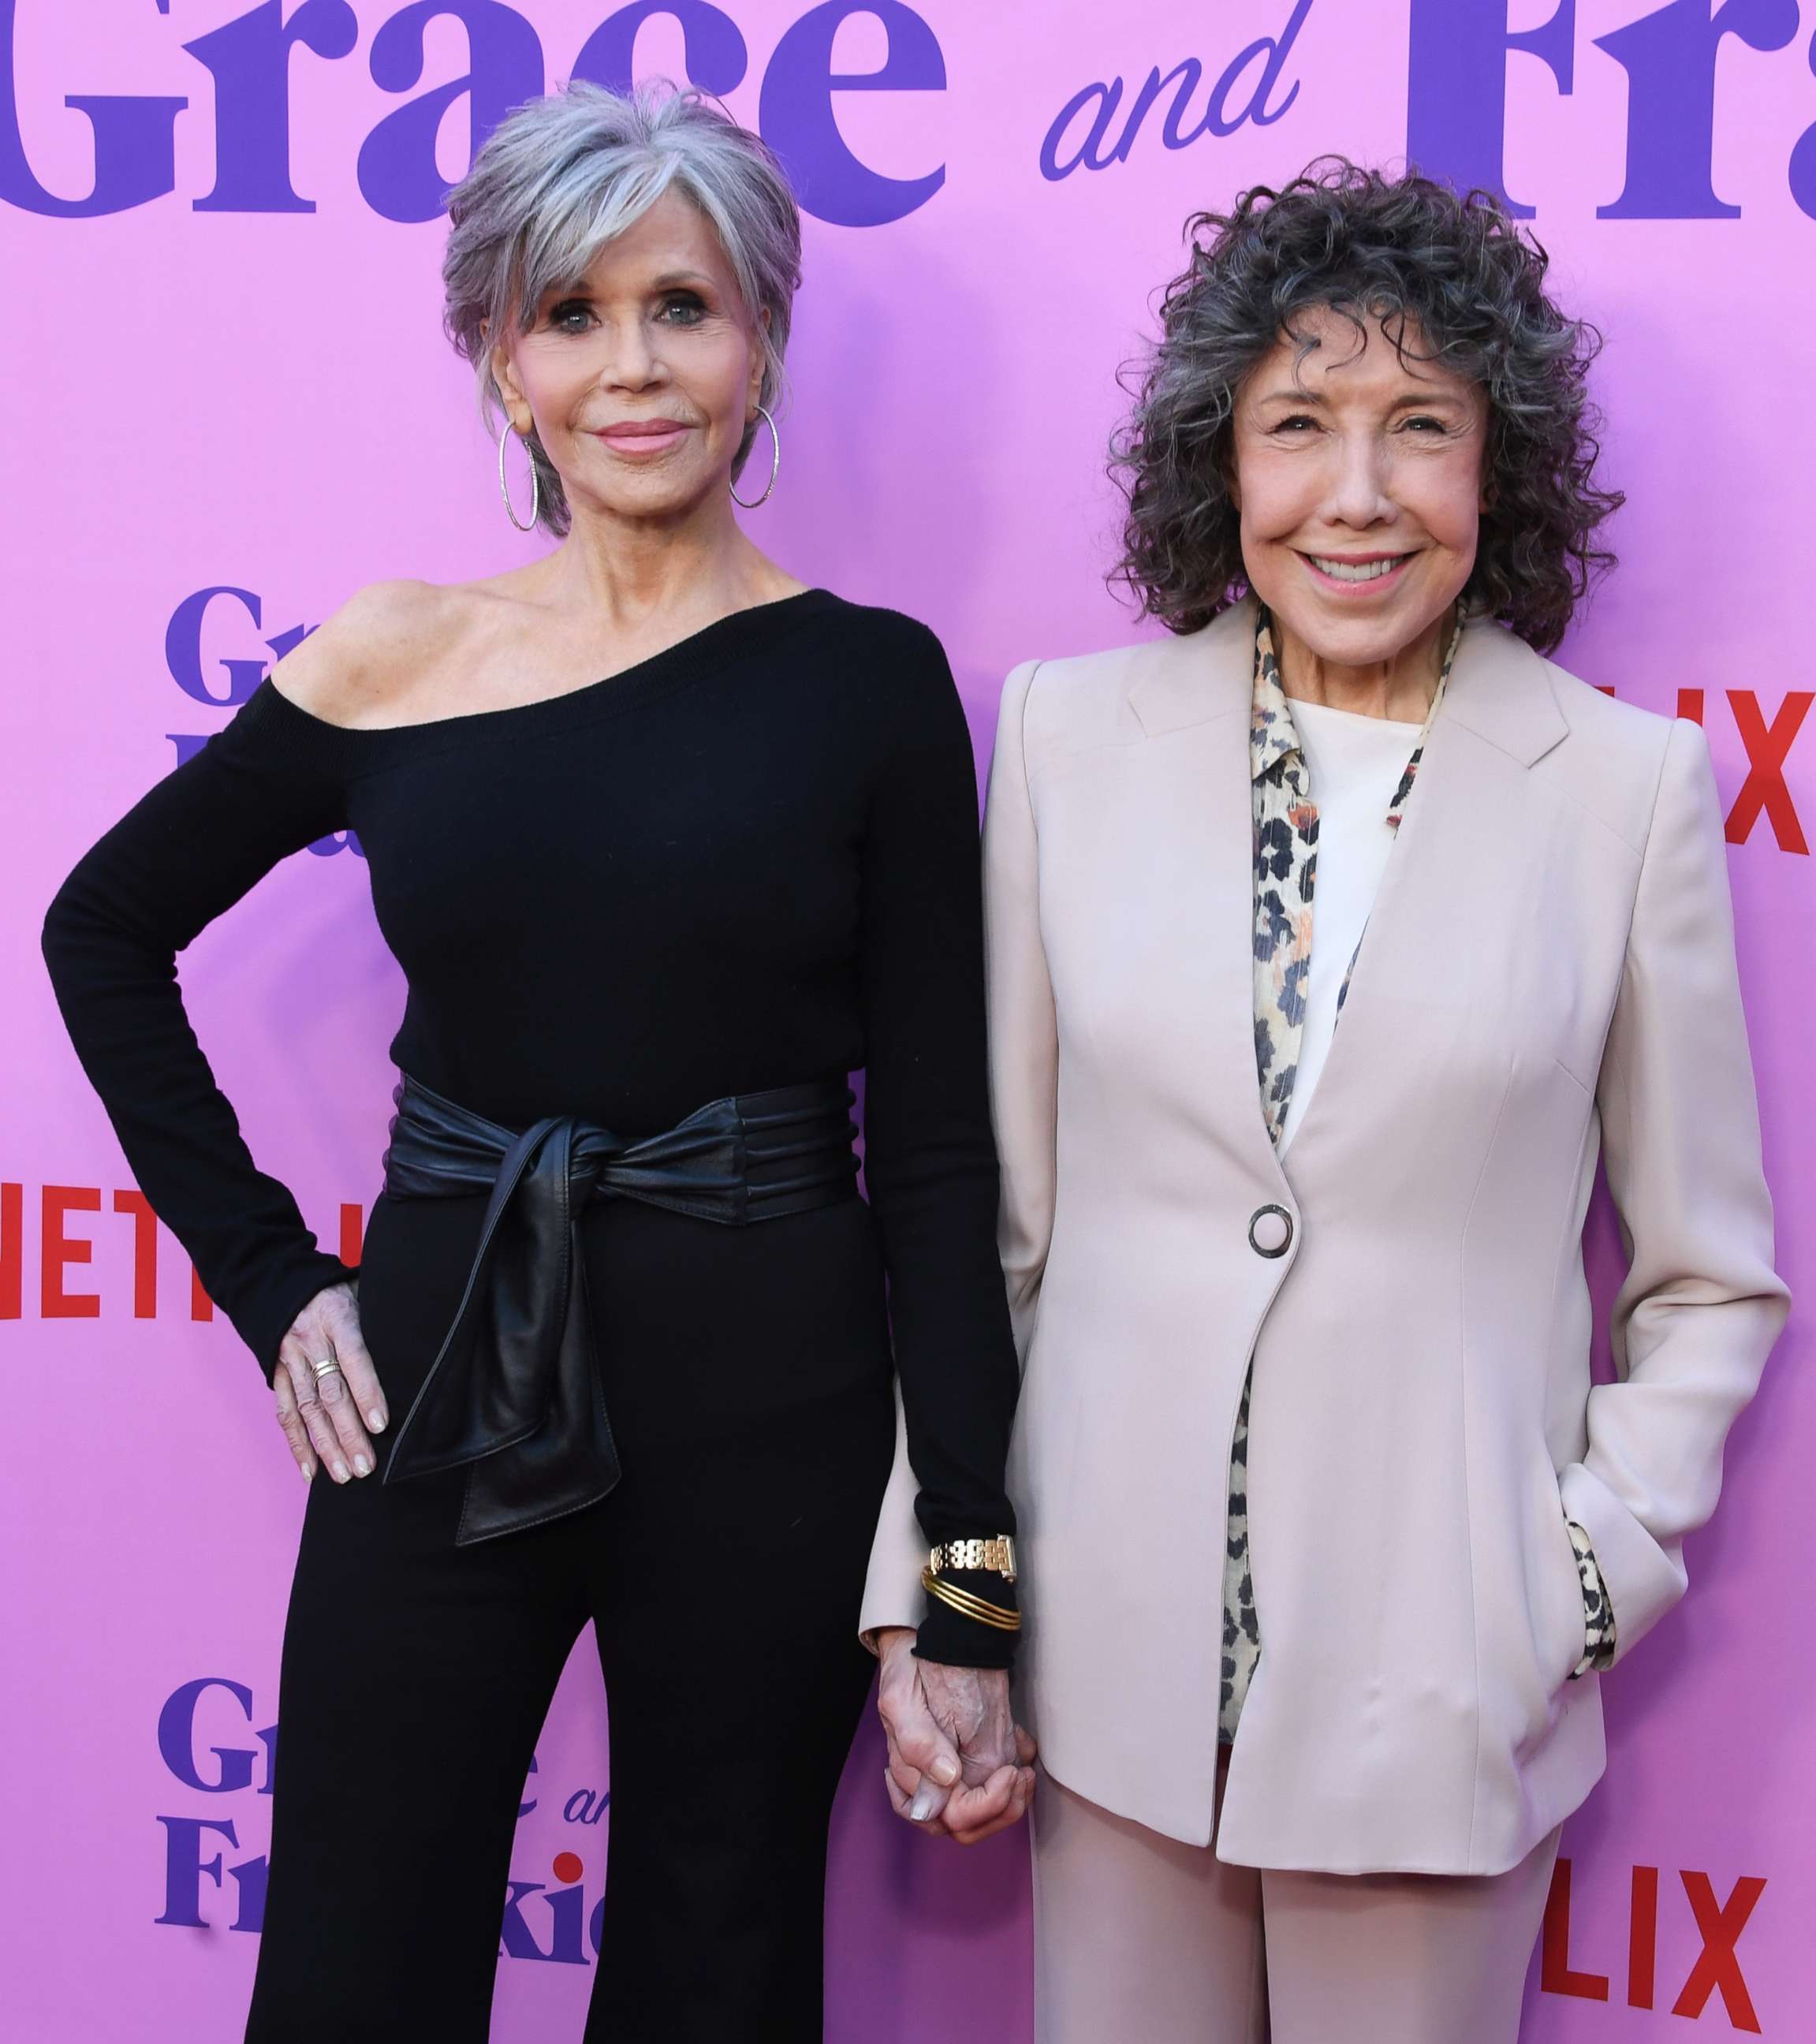 PHOTO: Jane Fonda and Lily Tomlin attend the Los Angeles Special FYC Event For Netflix's "Grace And Frankie" in Hollywood, Calif., April 23, 2022.